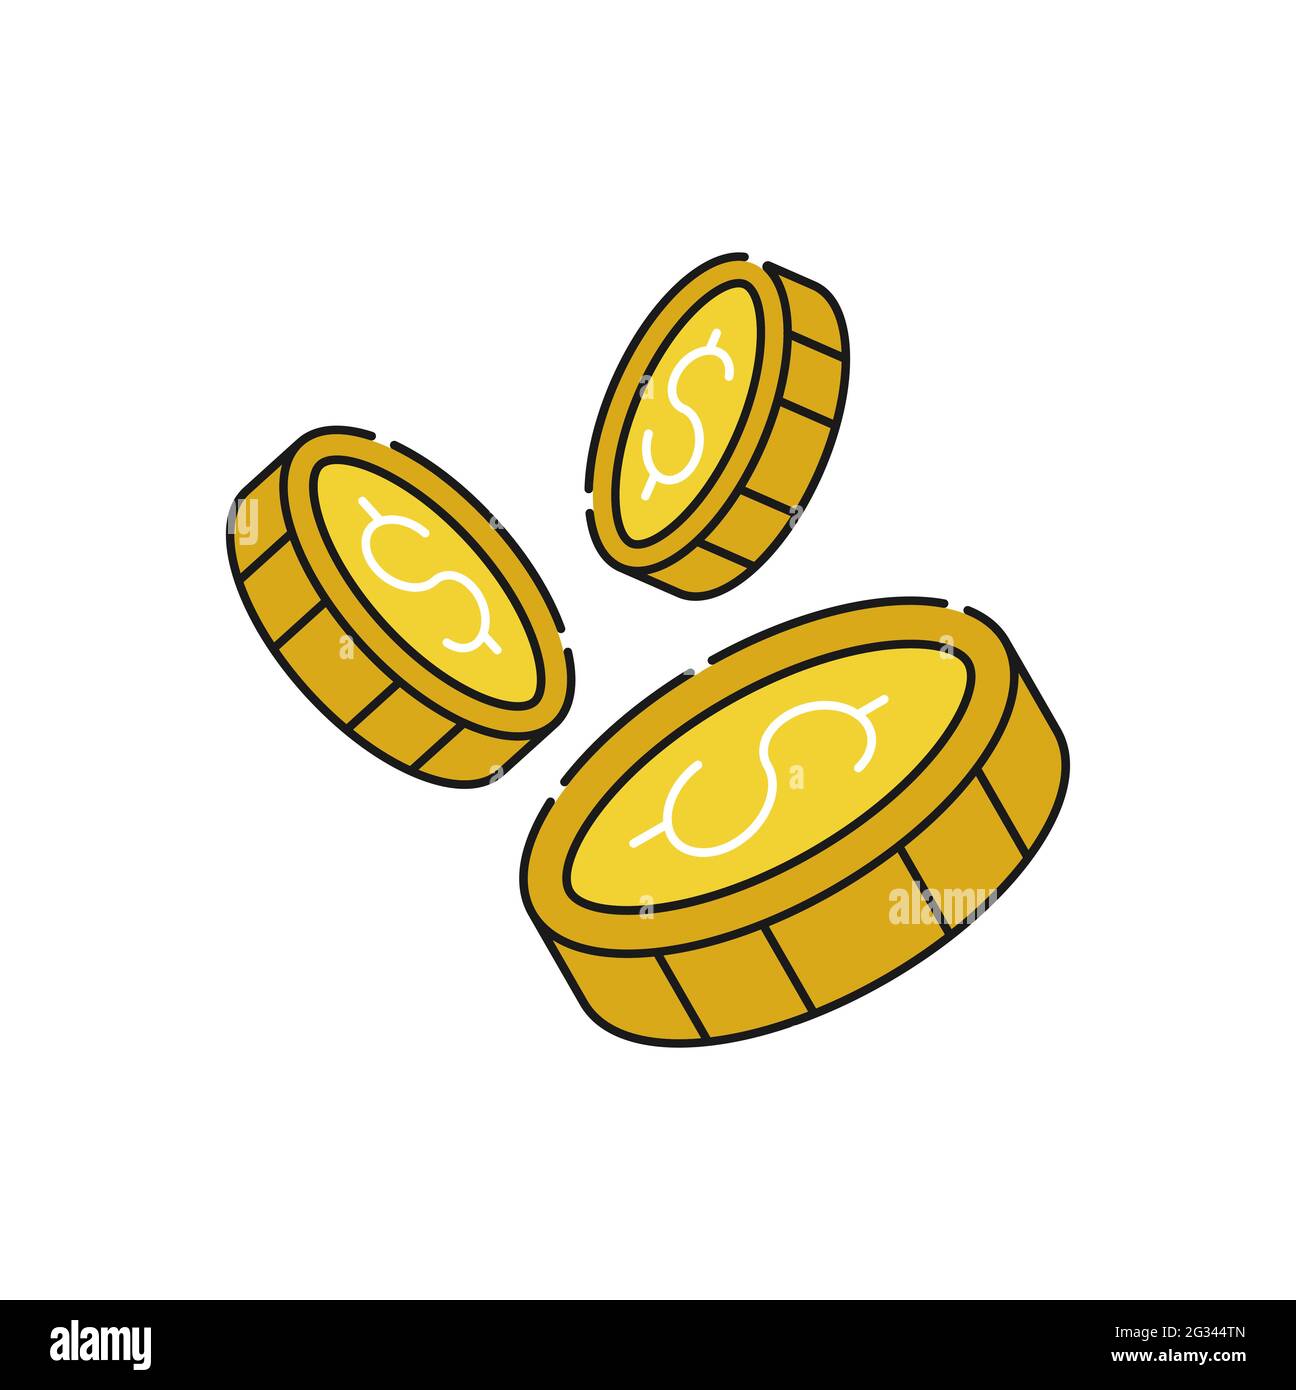 Coin icon Vector Illustration. Dollar Money Coin icon vector design concept for Payment, Finance, Currency and Trading Business. Money Coins vector ic Stock Vector